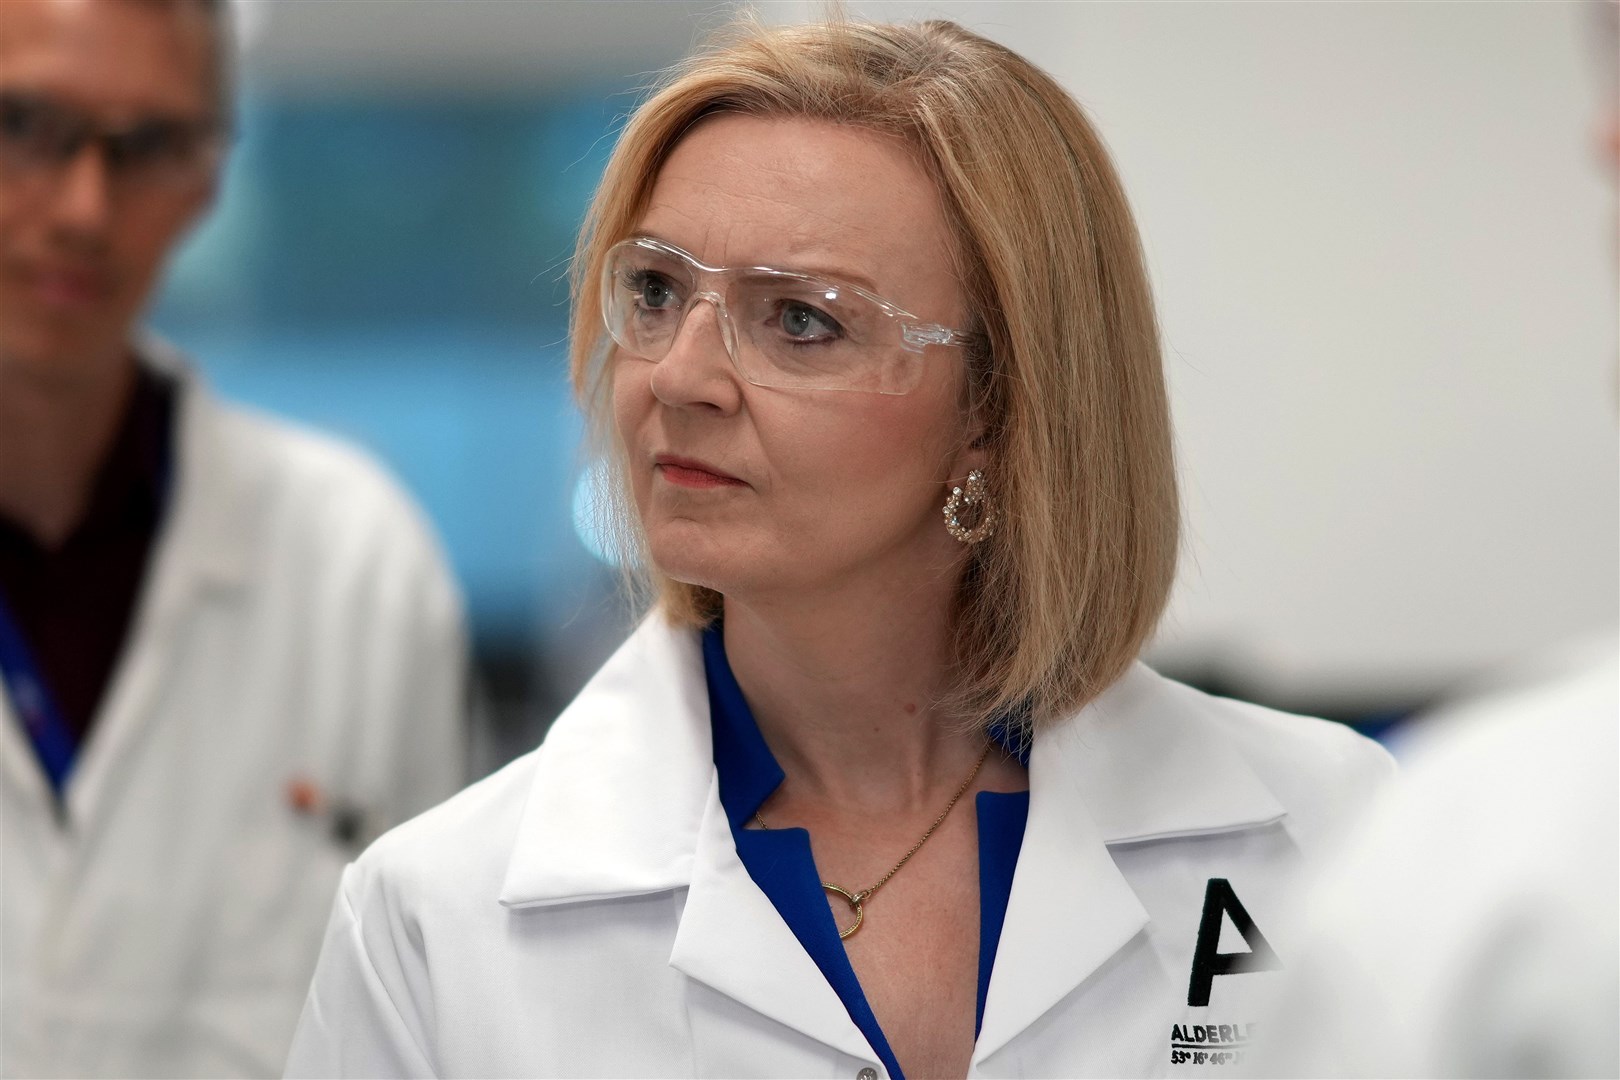 Liz Truss speaks to scientists during a campaign visit to a life sciences laboratory at Alderley Park in Manchester (Christopher Furlong/PA)